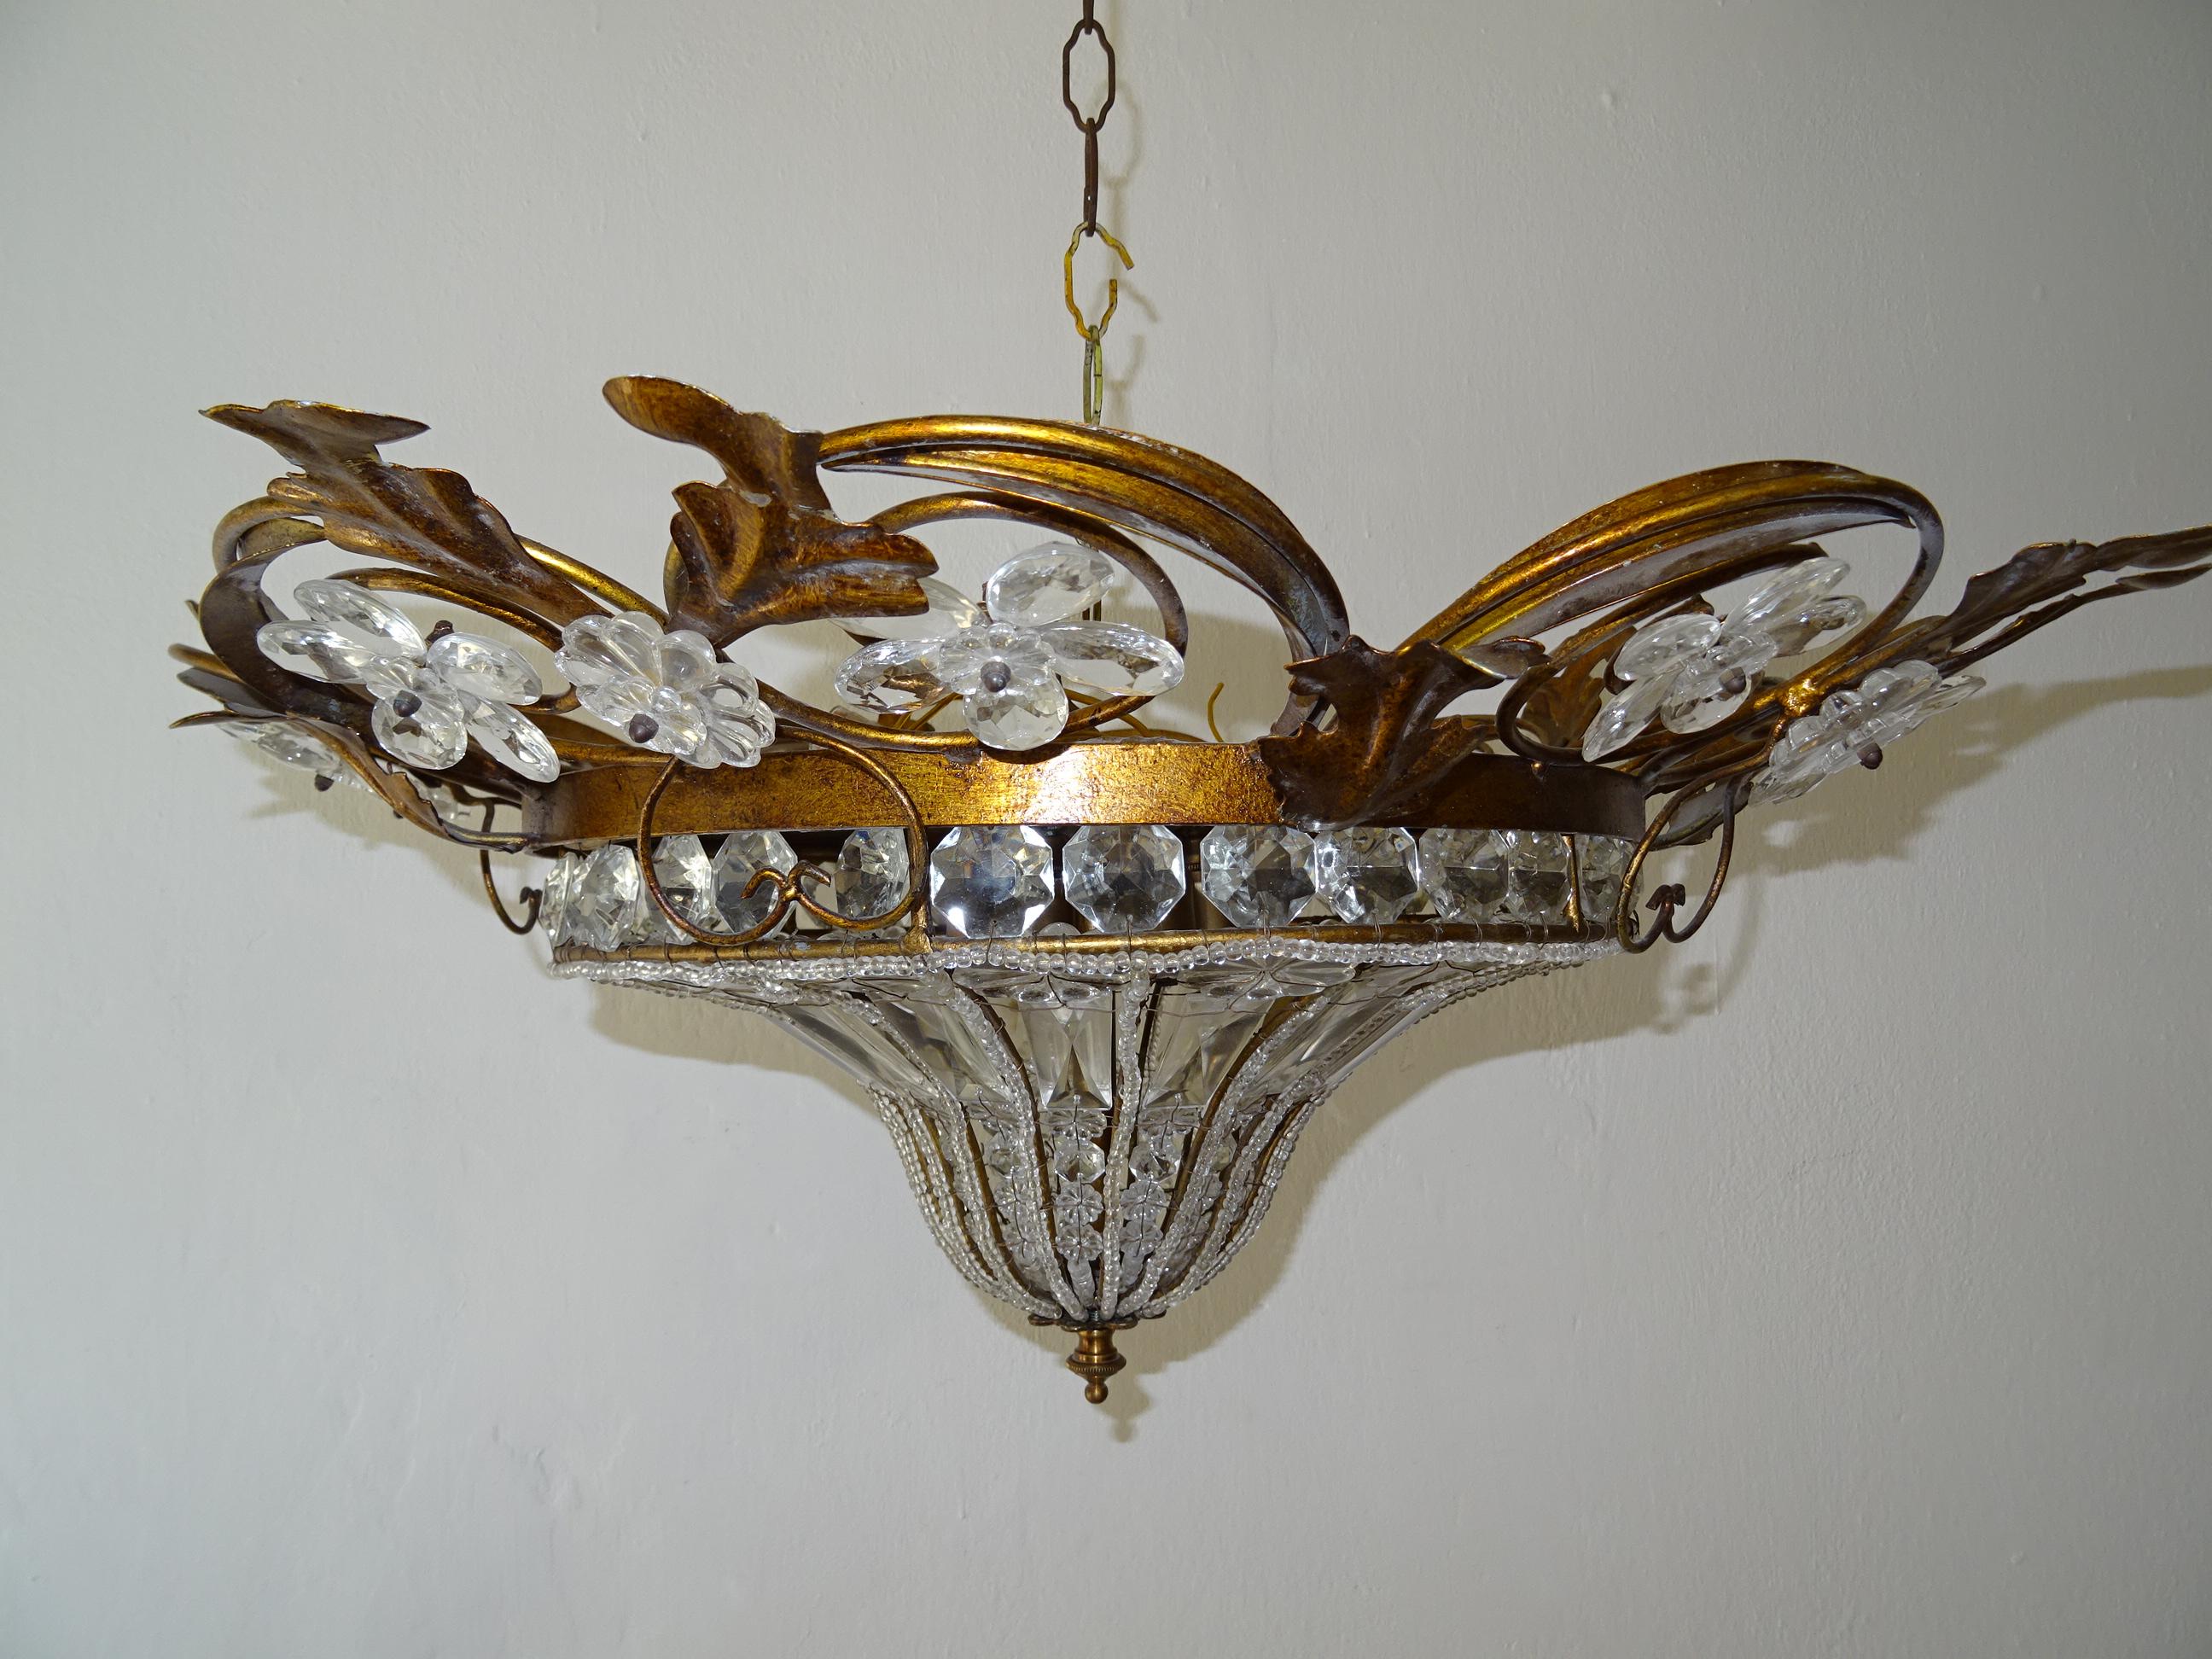 Rare big size. Housing 6 lights. Will be rewired free of charge with certified UL US sockets for the USA and appropriate sockets for all other countries and ready to hang. Crystal beading with florets and prisms throughout. Big crystal prism flowers